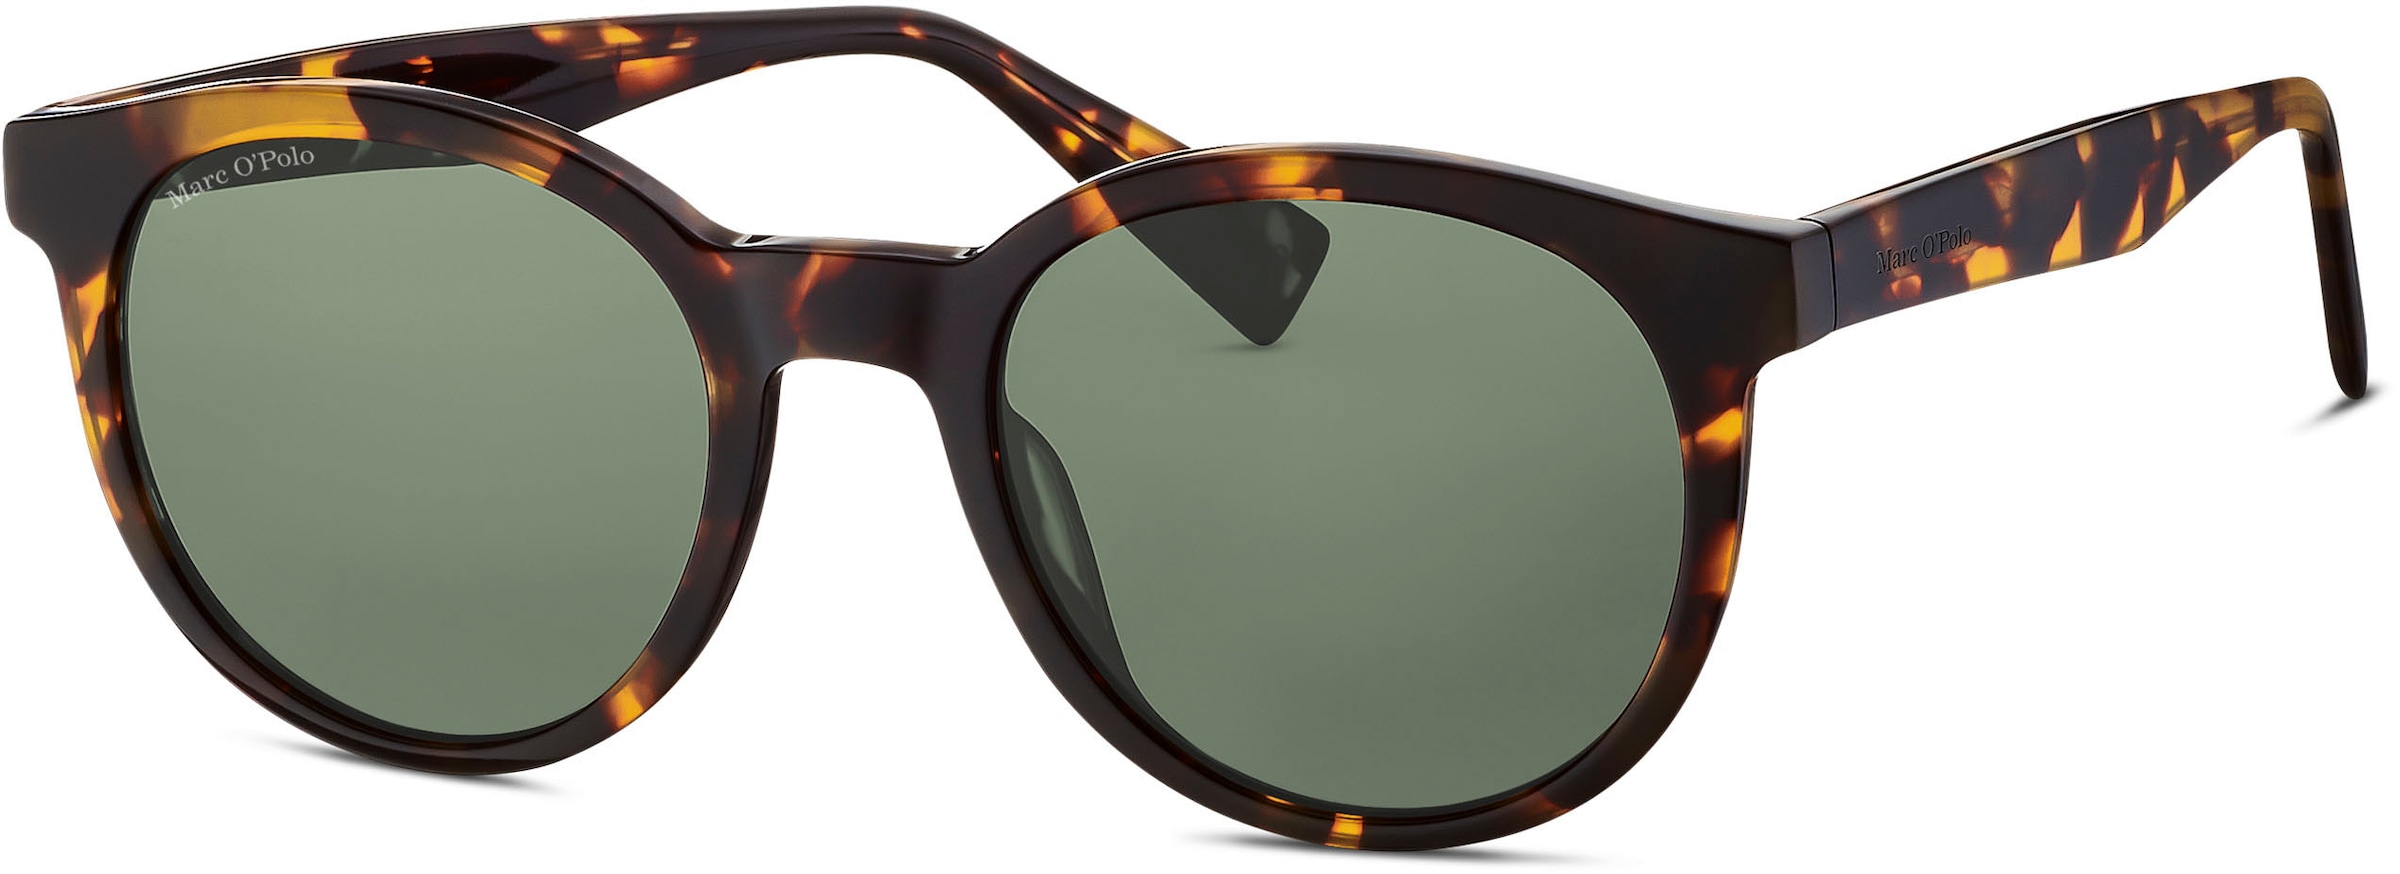 Marc O\'Polo Sonnenbrille »Modell online 506185«, Panto-Form kaufen